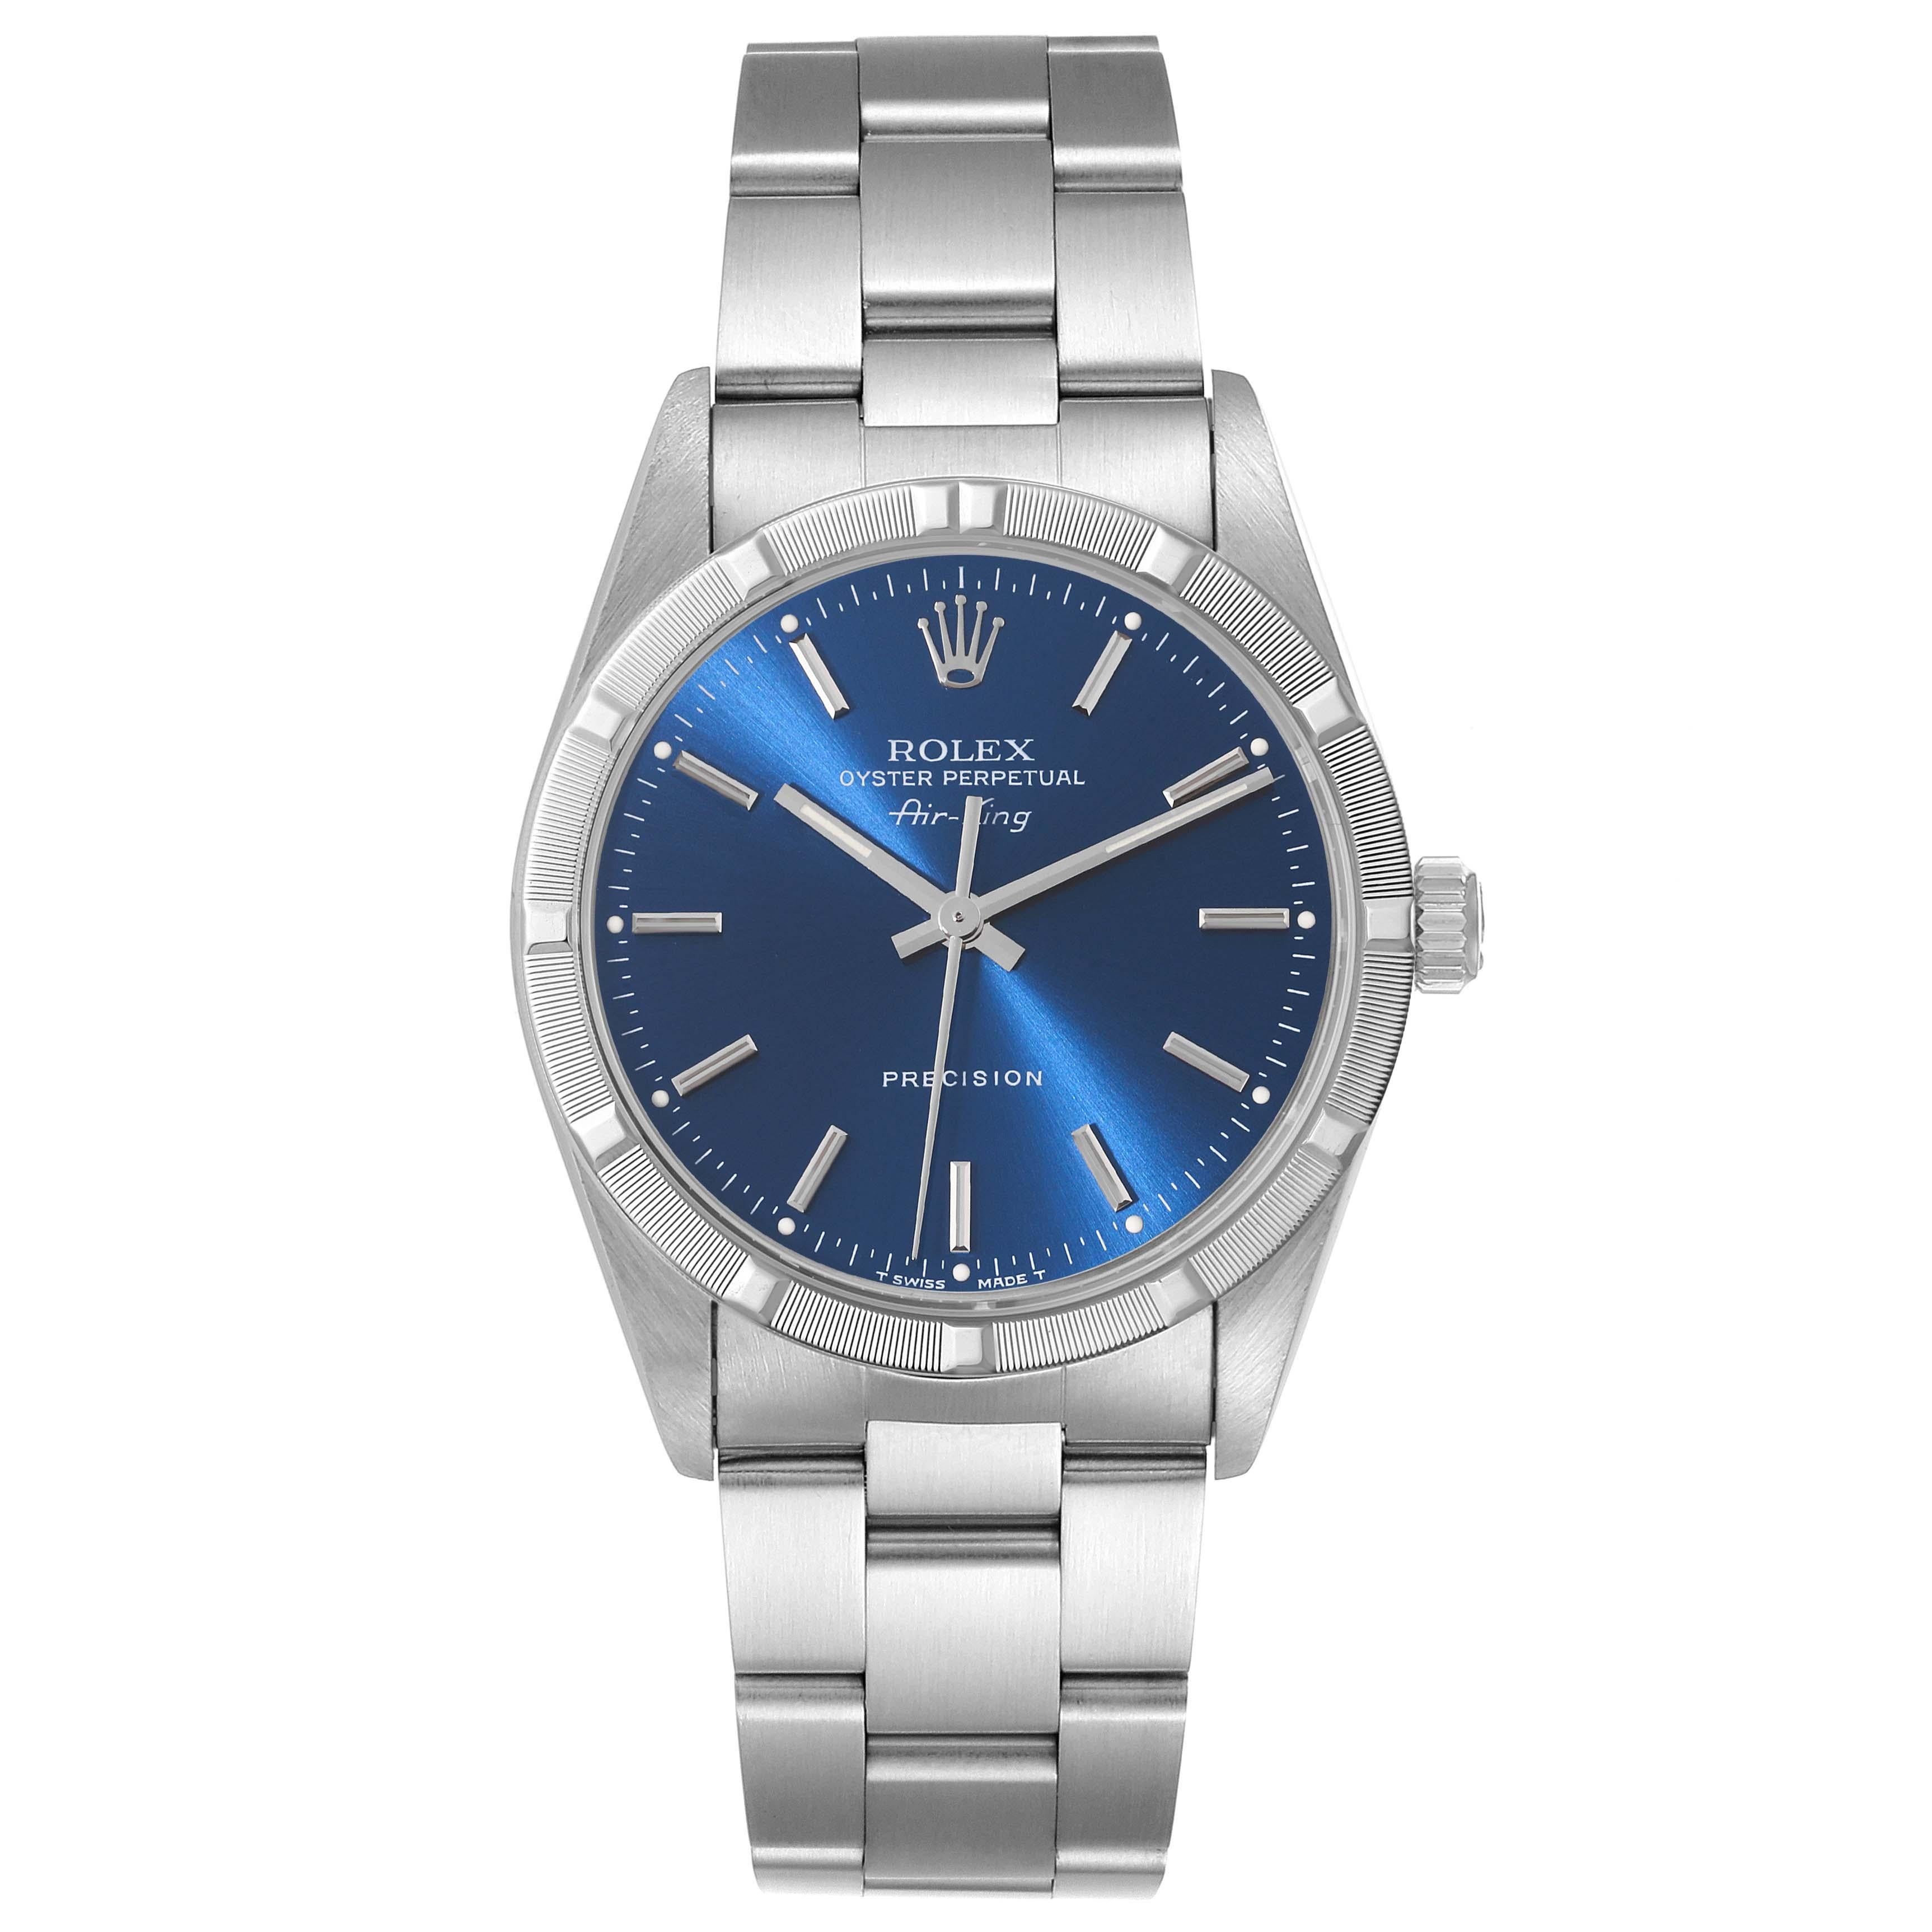 Rolex Air King Engine Turned Bezel Blue Dial Steel Mens Watch 14010 Box Papers. Automatic self-winding movement. Stainless steel case 34.0 mm in diameter. Rolex logo on the crown. Stainless steel engine turned bezel. Scratch resistant sapphire